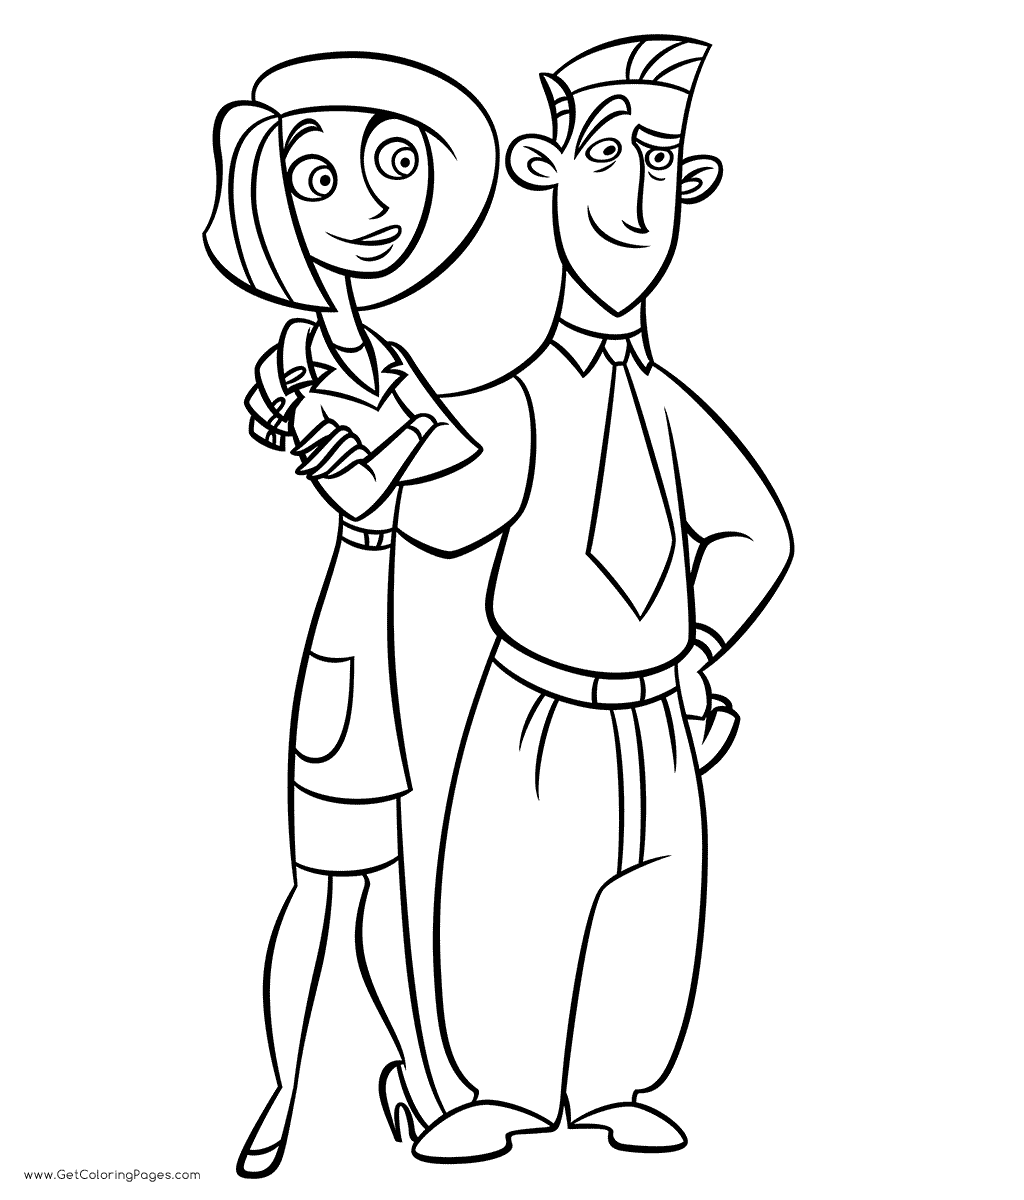 Dr. Ann and James Timothy Possible Coloring Pages